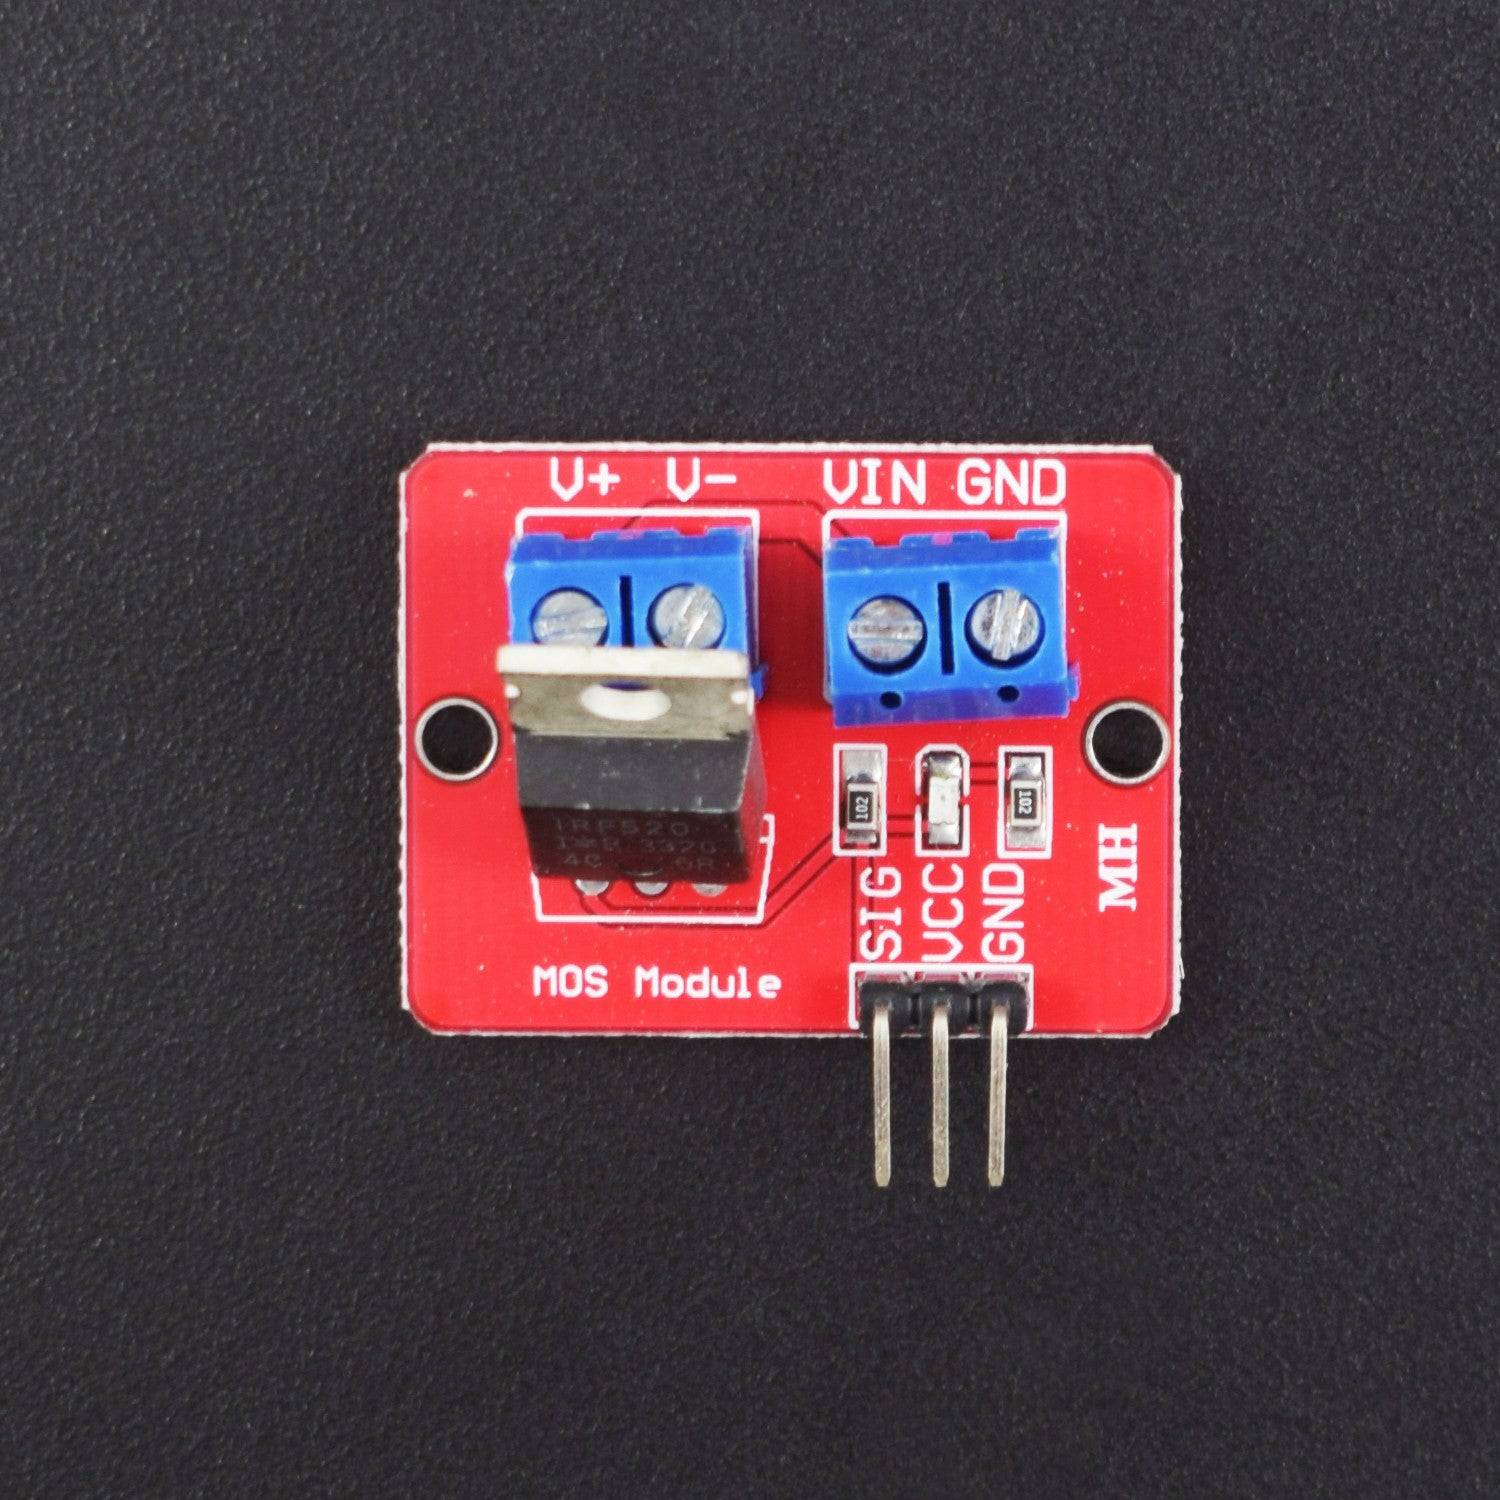 0-24V Top Mosfet Button IRF520 MOS Driver Module For Arduino MCU ARM Raspberry Pi - NA078 - REES52